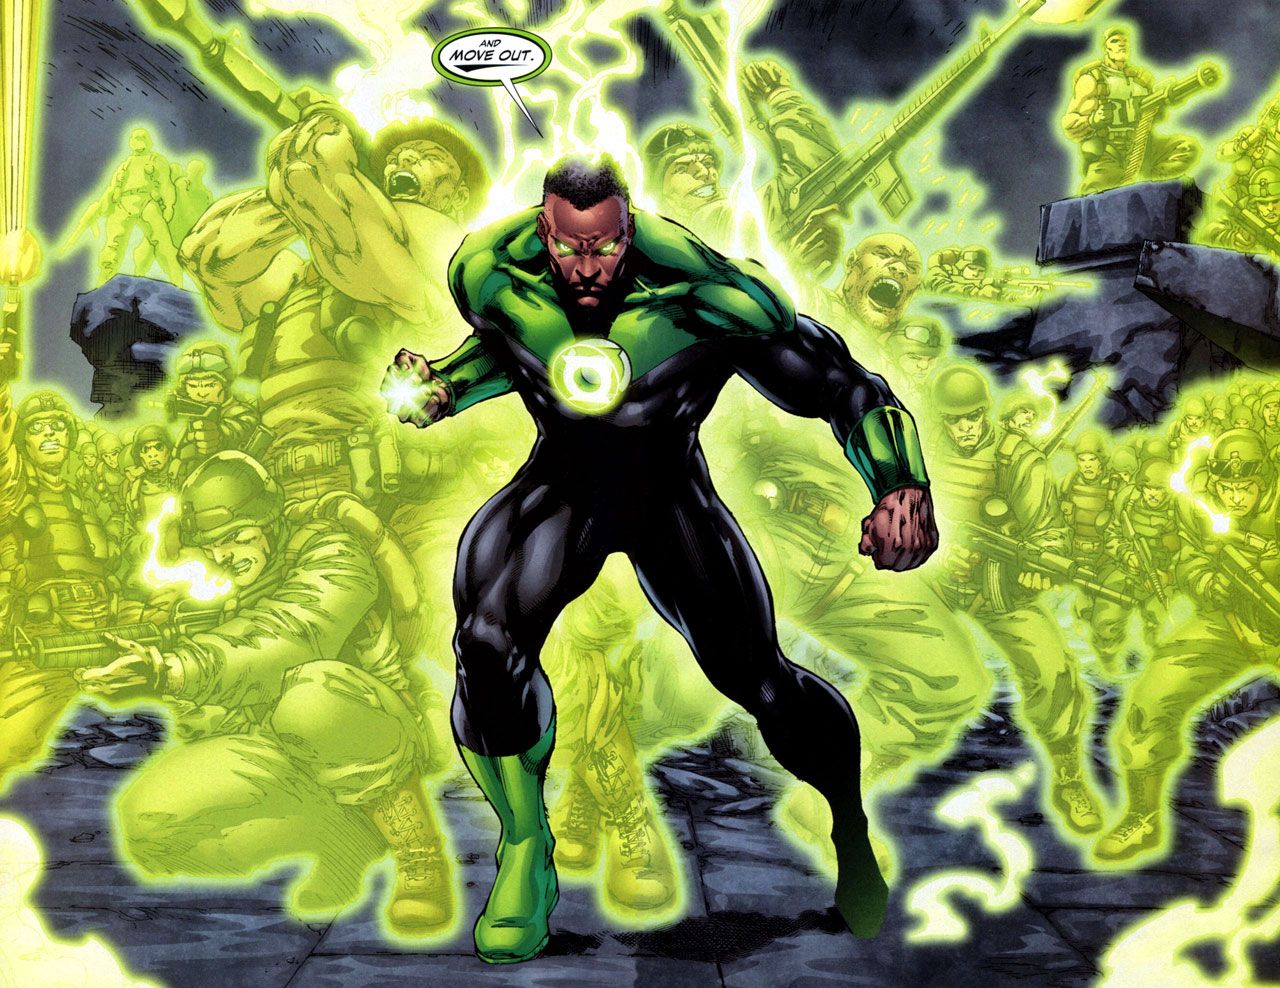 John Stewart Explained: Who Is the Green Lantern Corps Character?